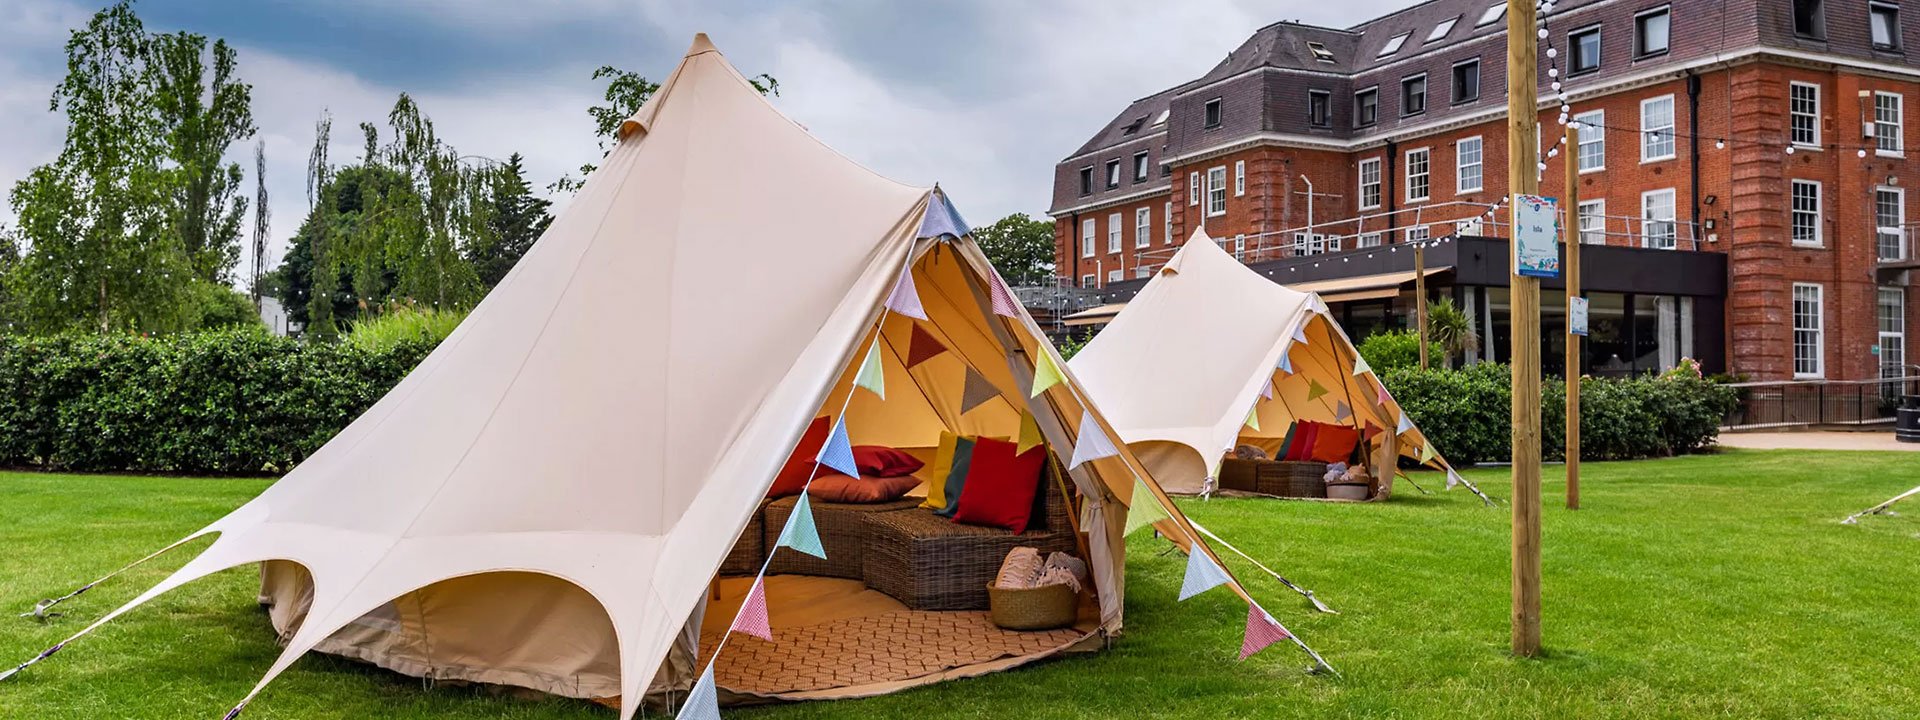 Meeting space created with tents, alternative space for meetings - Classic British Hotels